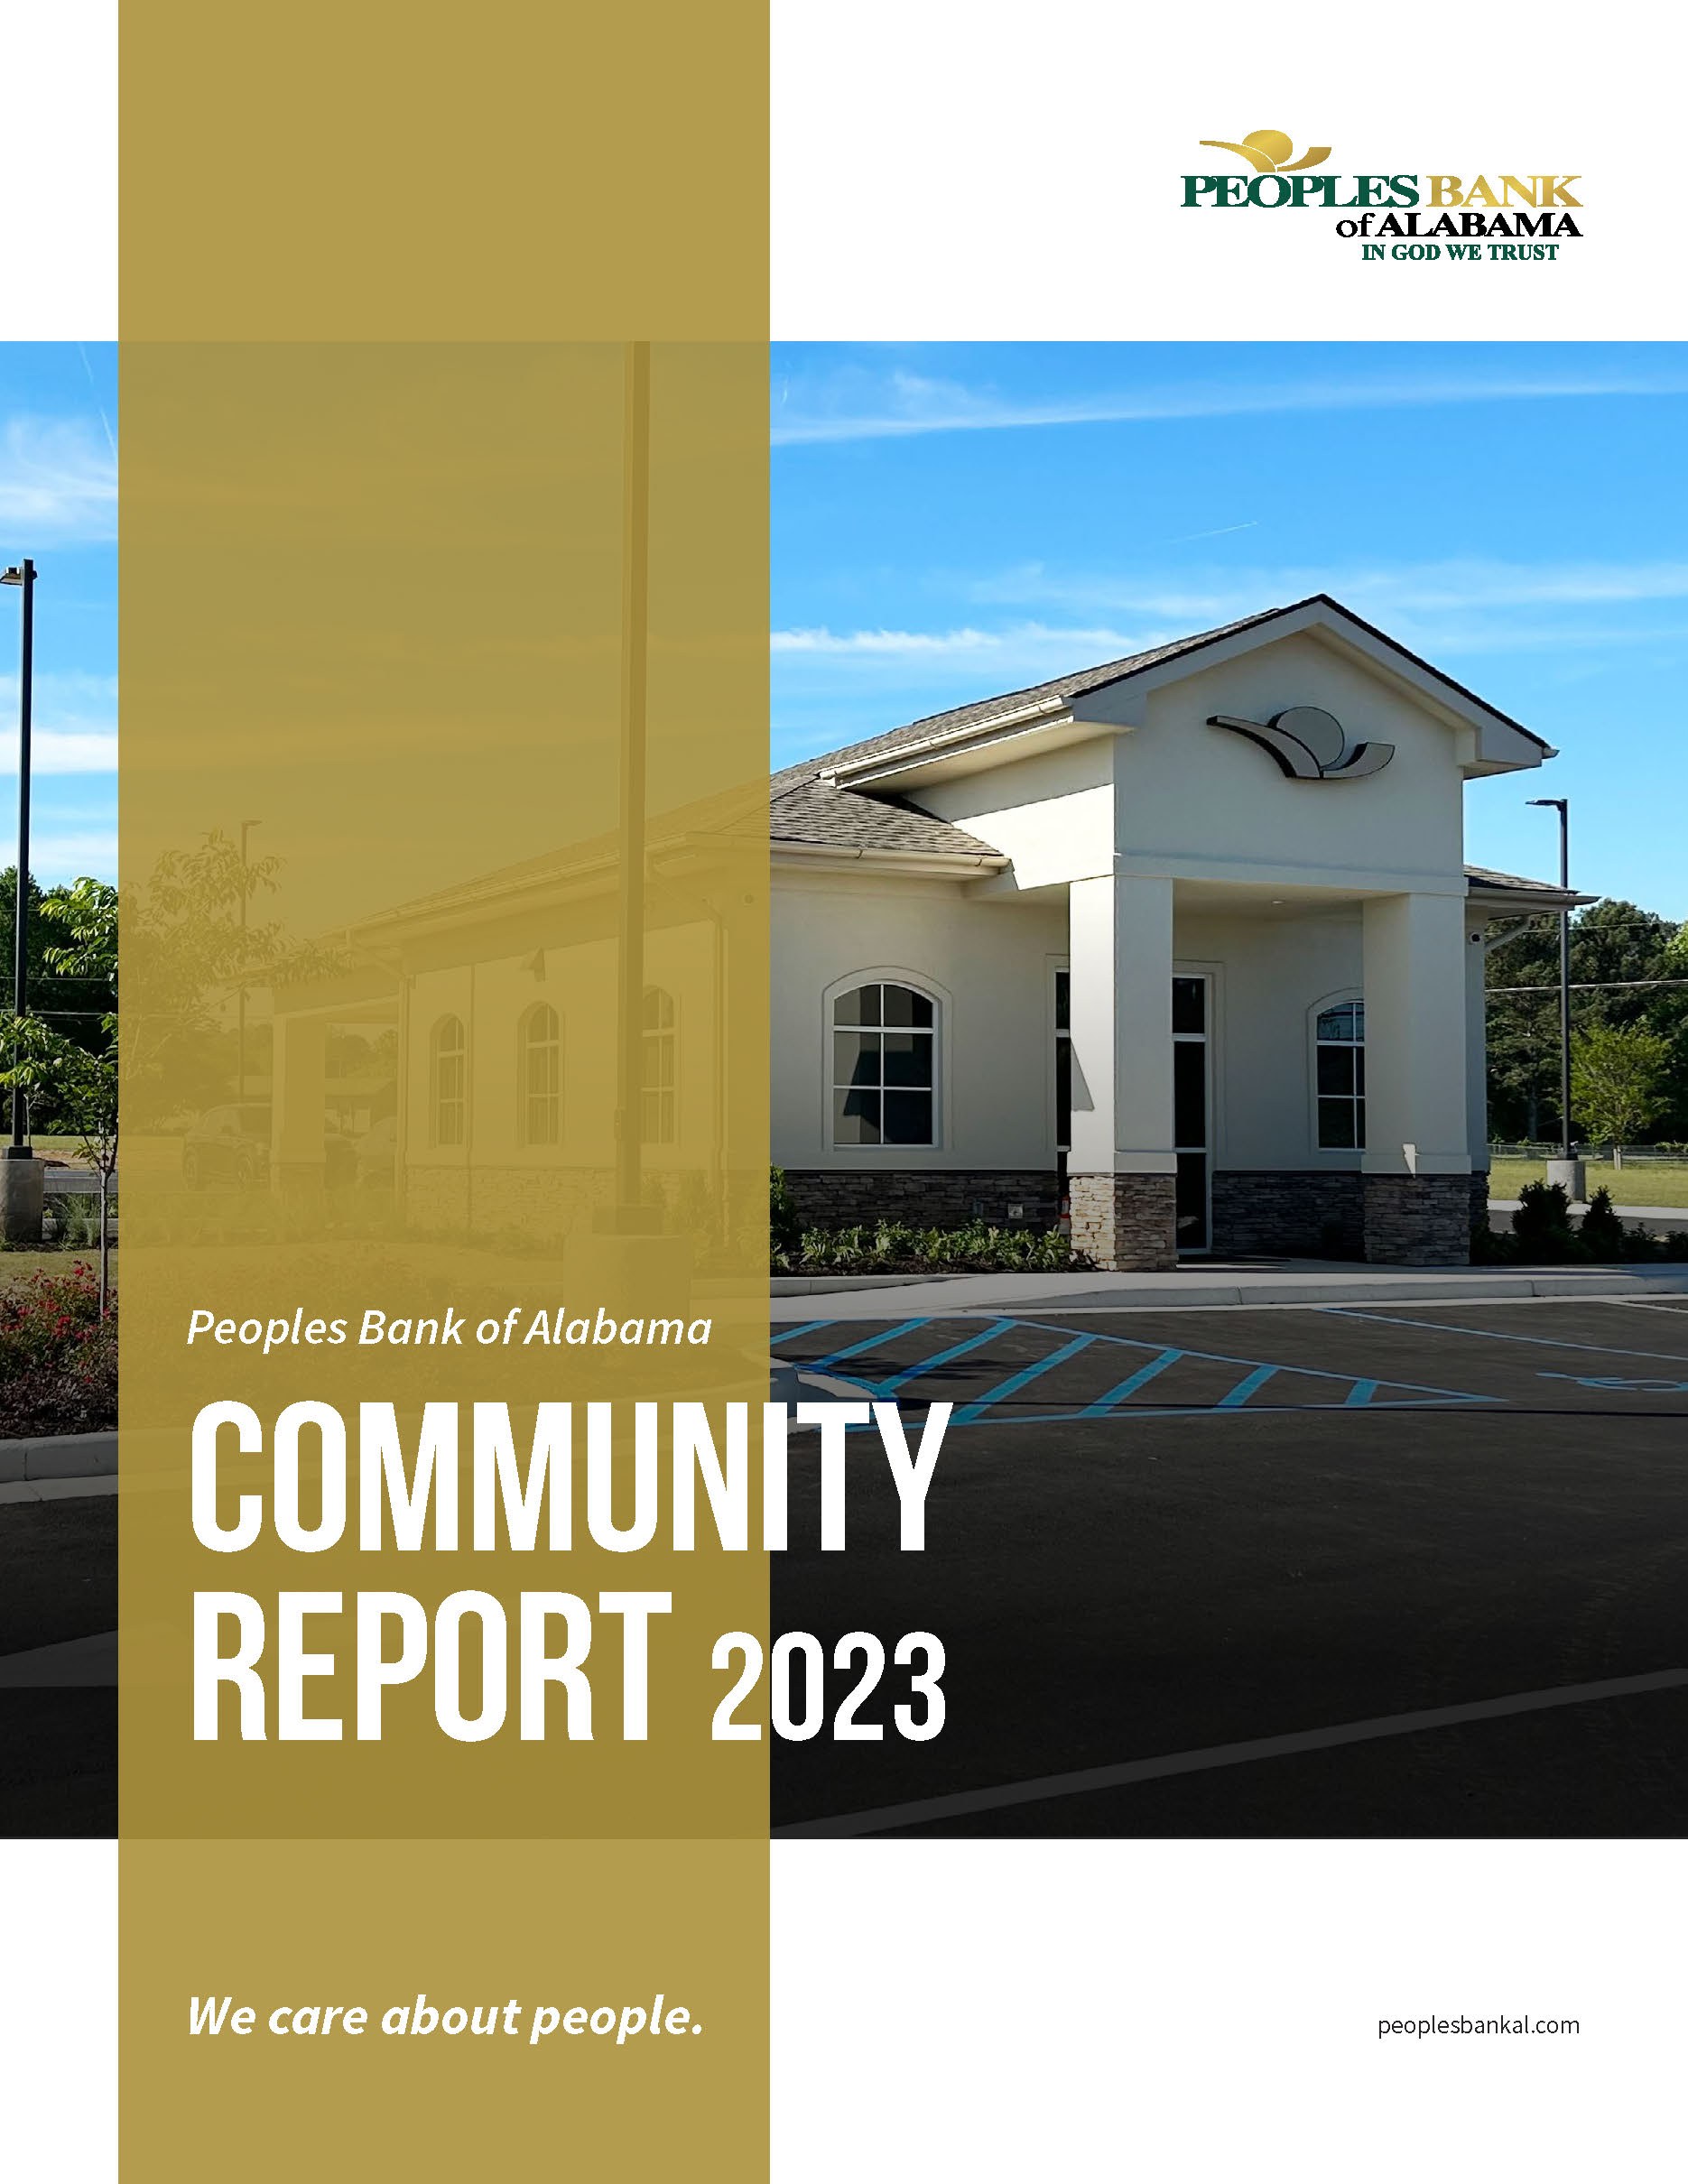 Download the 2023 Community Report